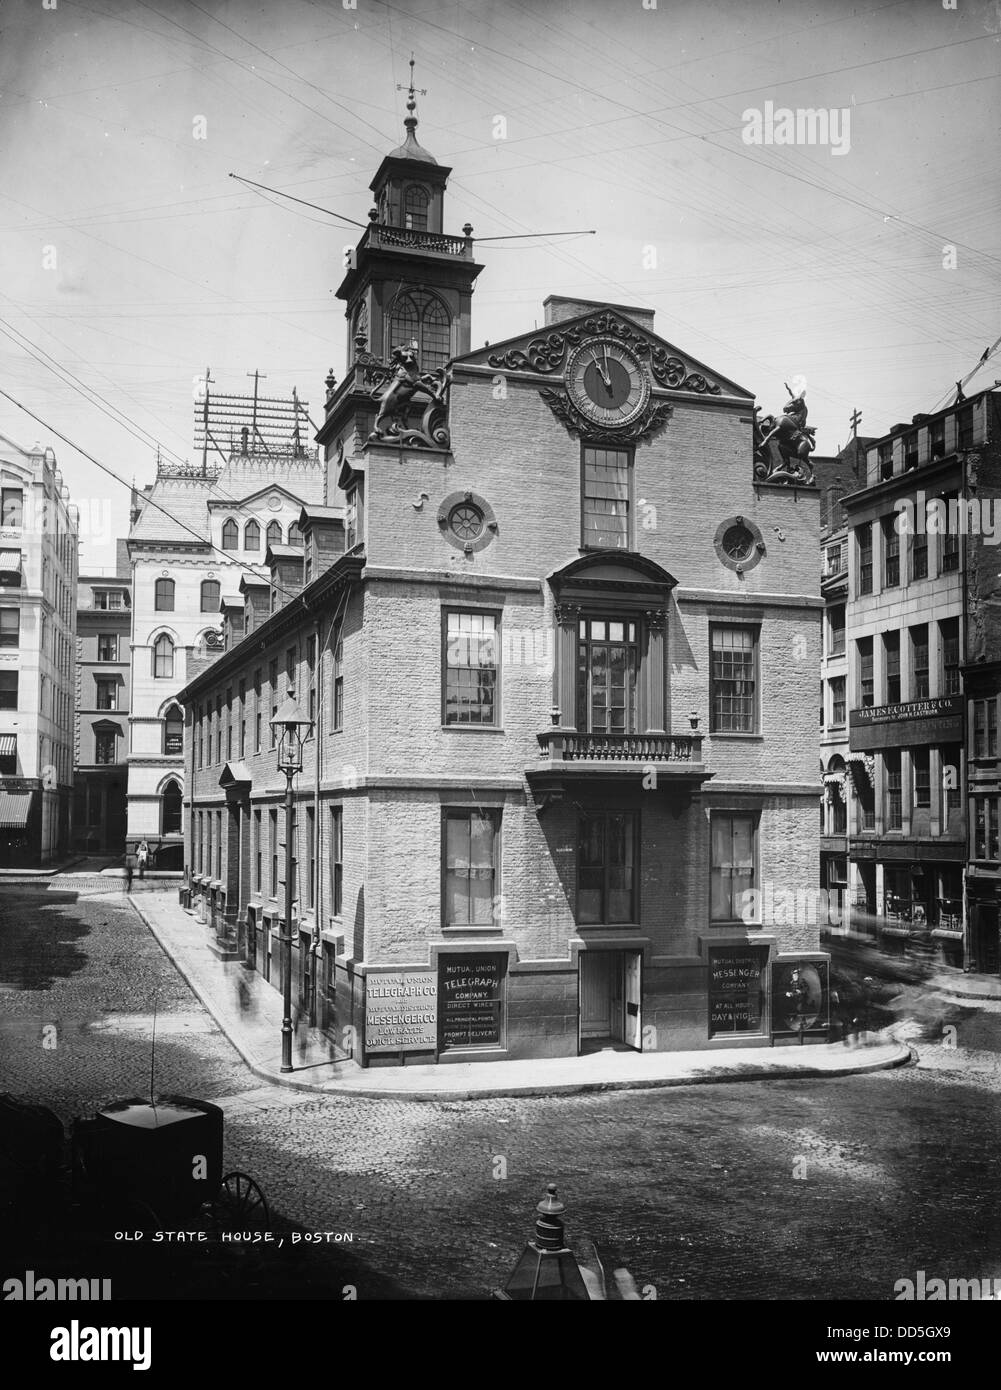 The Old State House, Boston, Massachusetts, by William Henry Jackson, circa 1900. Stock Photo